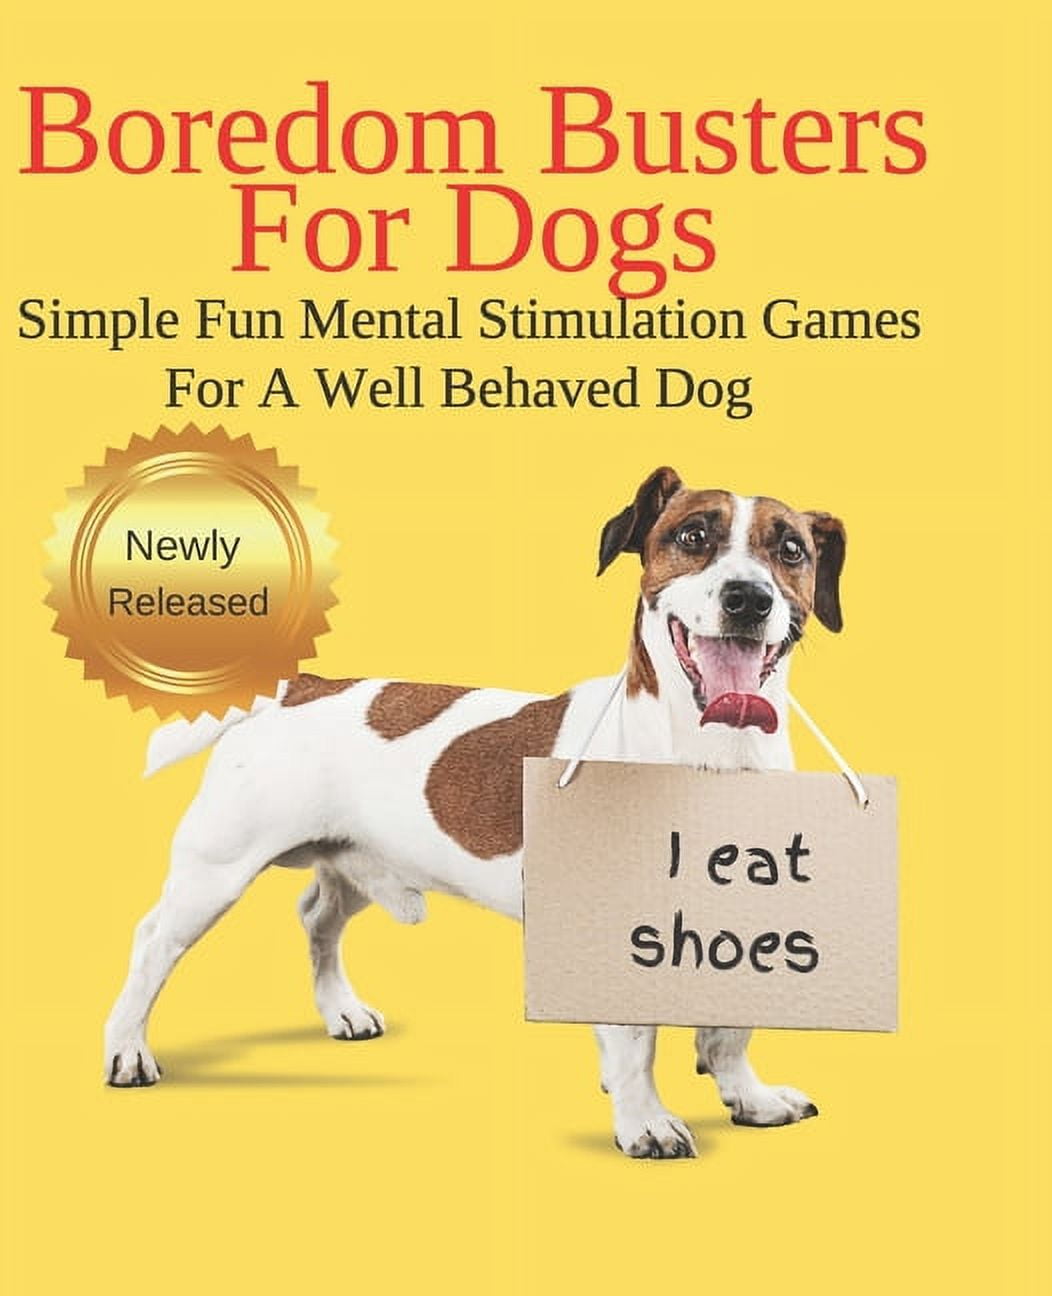 Boredom Busters for Dogs: 40 Tail-Wagging Games and Adventures